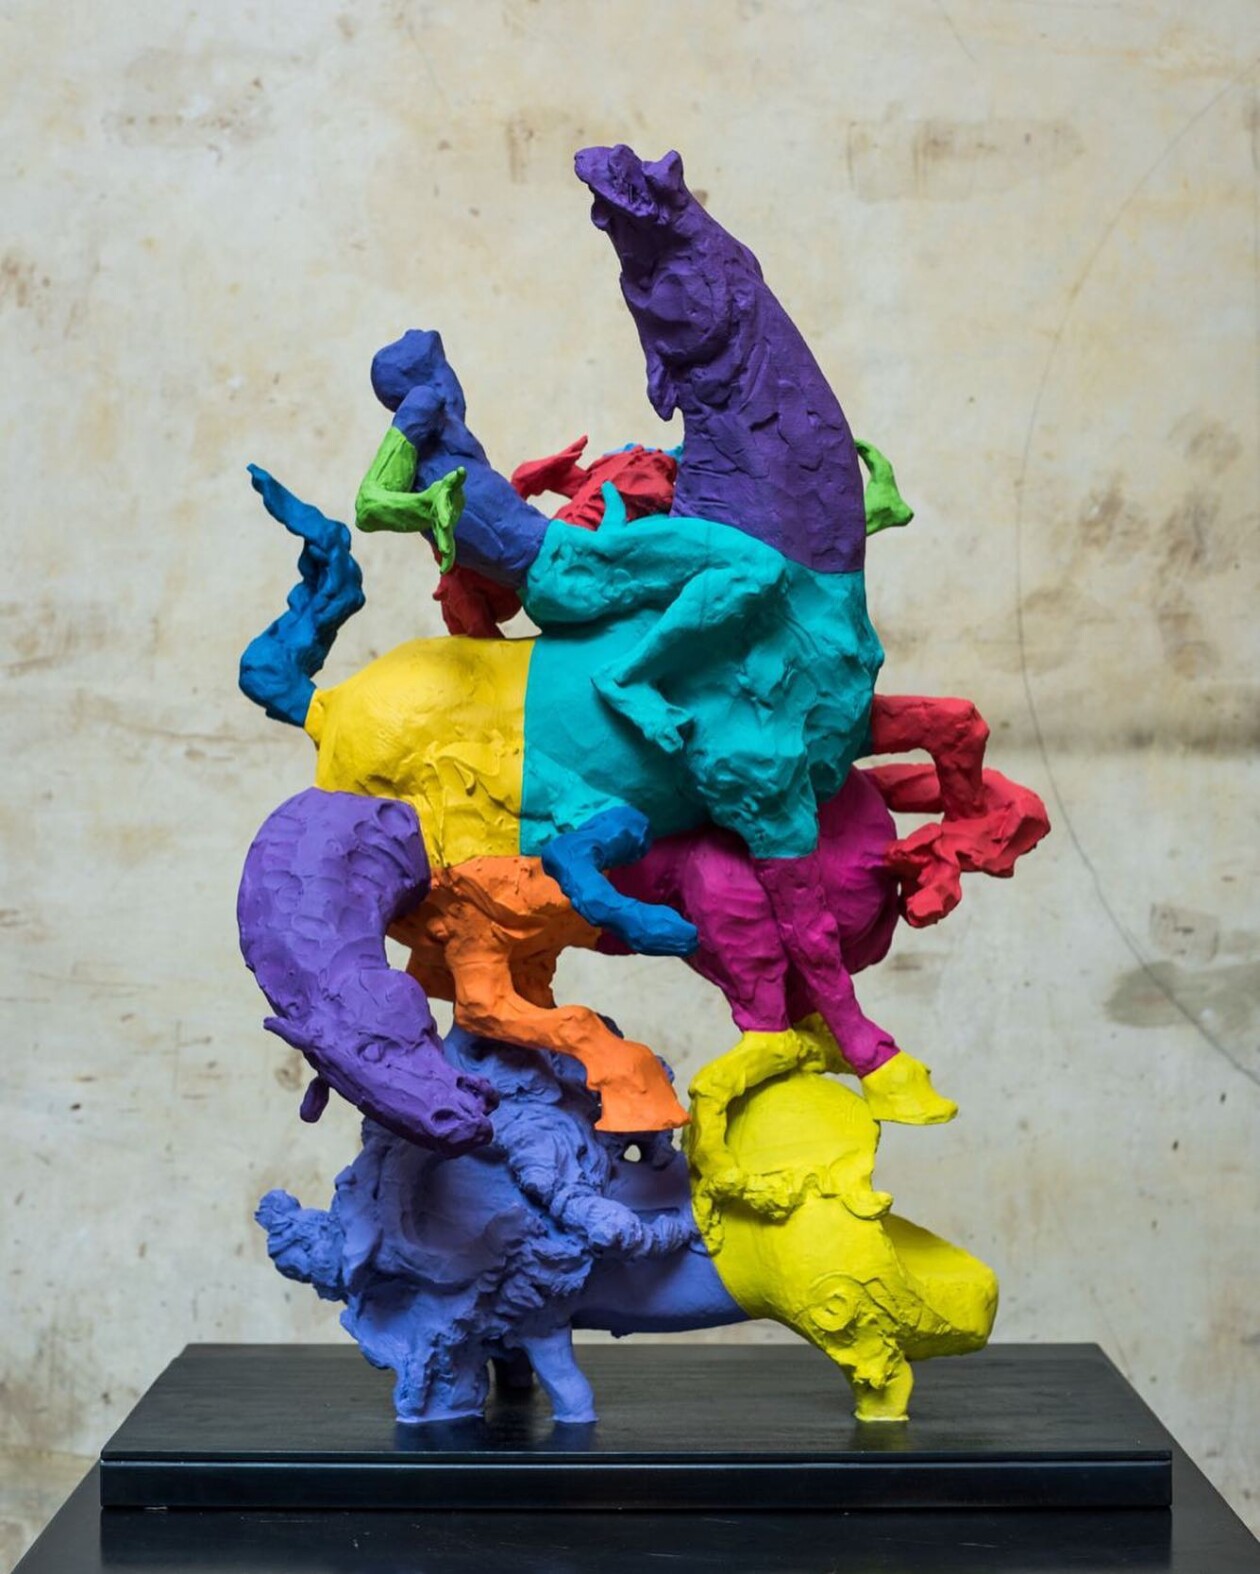 Multicolored 3d Printed Sculptures By Javier Marin (2)